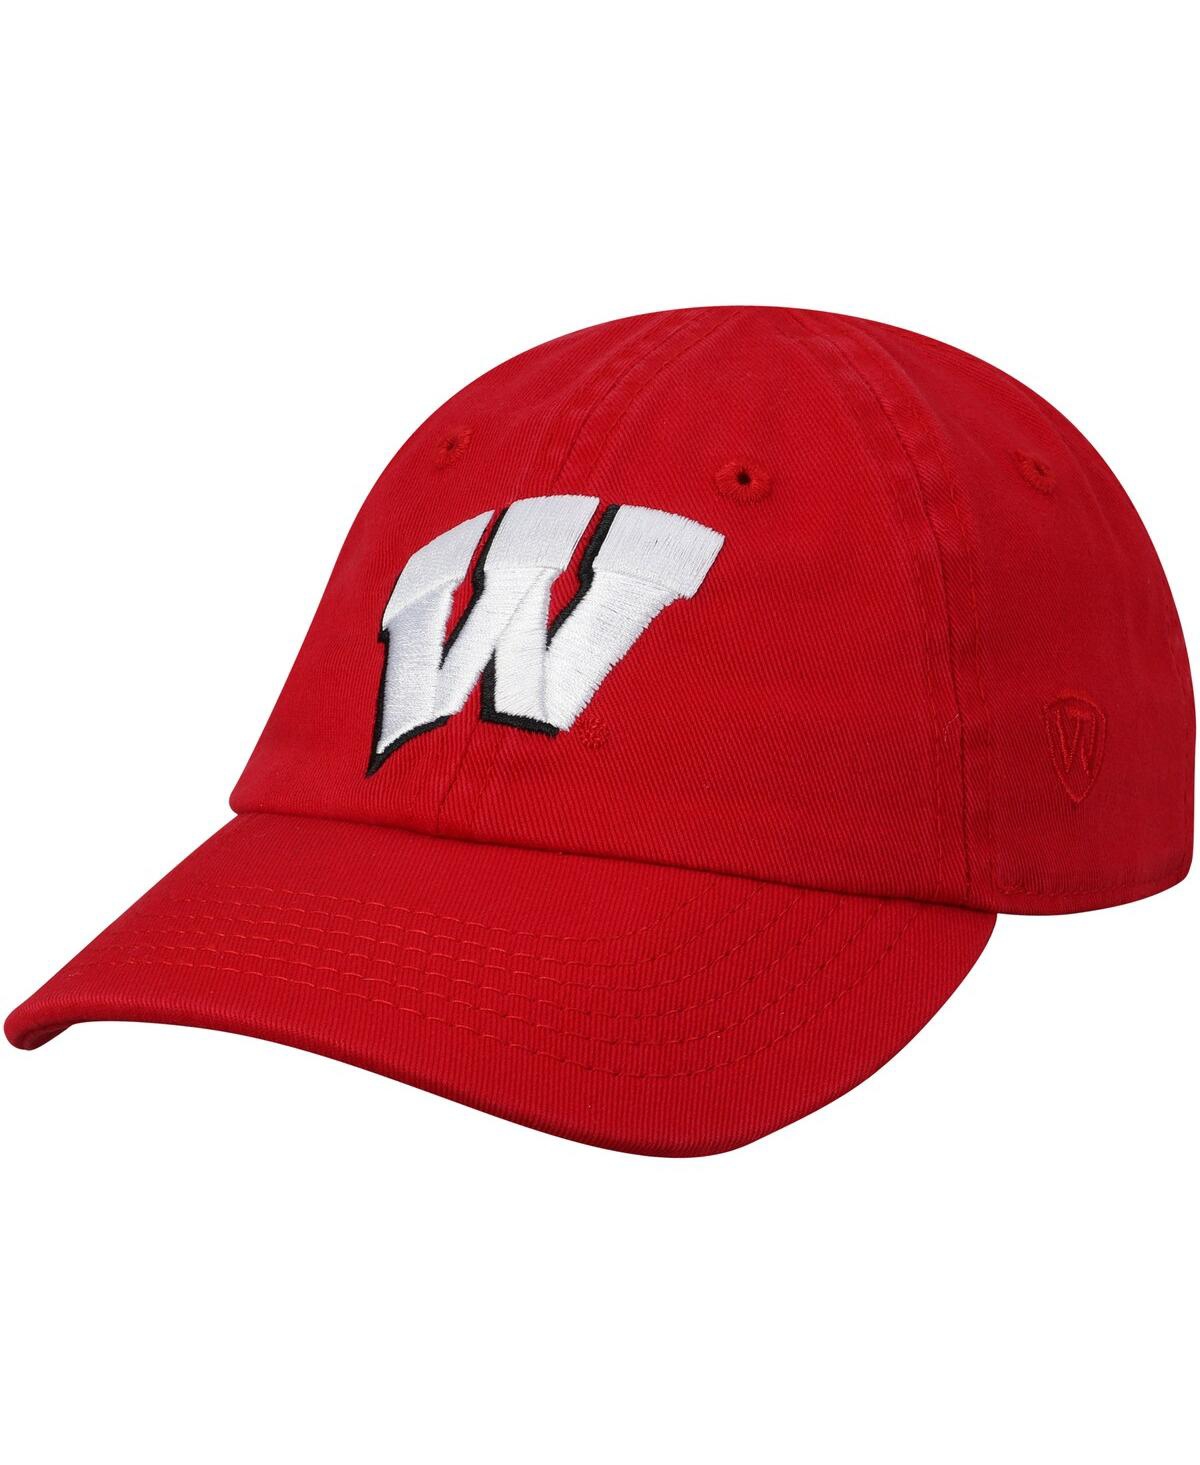 Top Of The World Babies' Infant Unisex  Red Wisconsin Badgers Mini Me Adjustable Hat